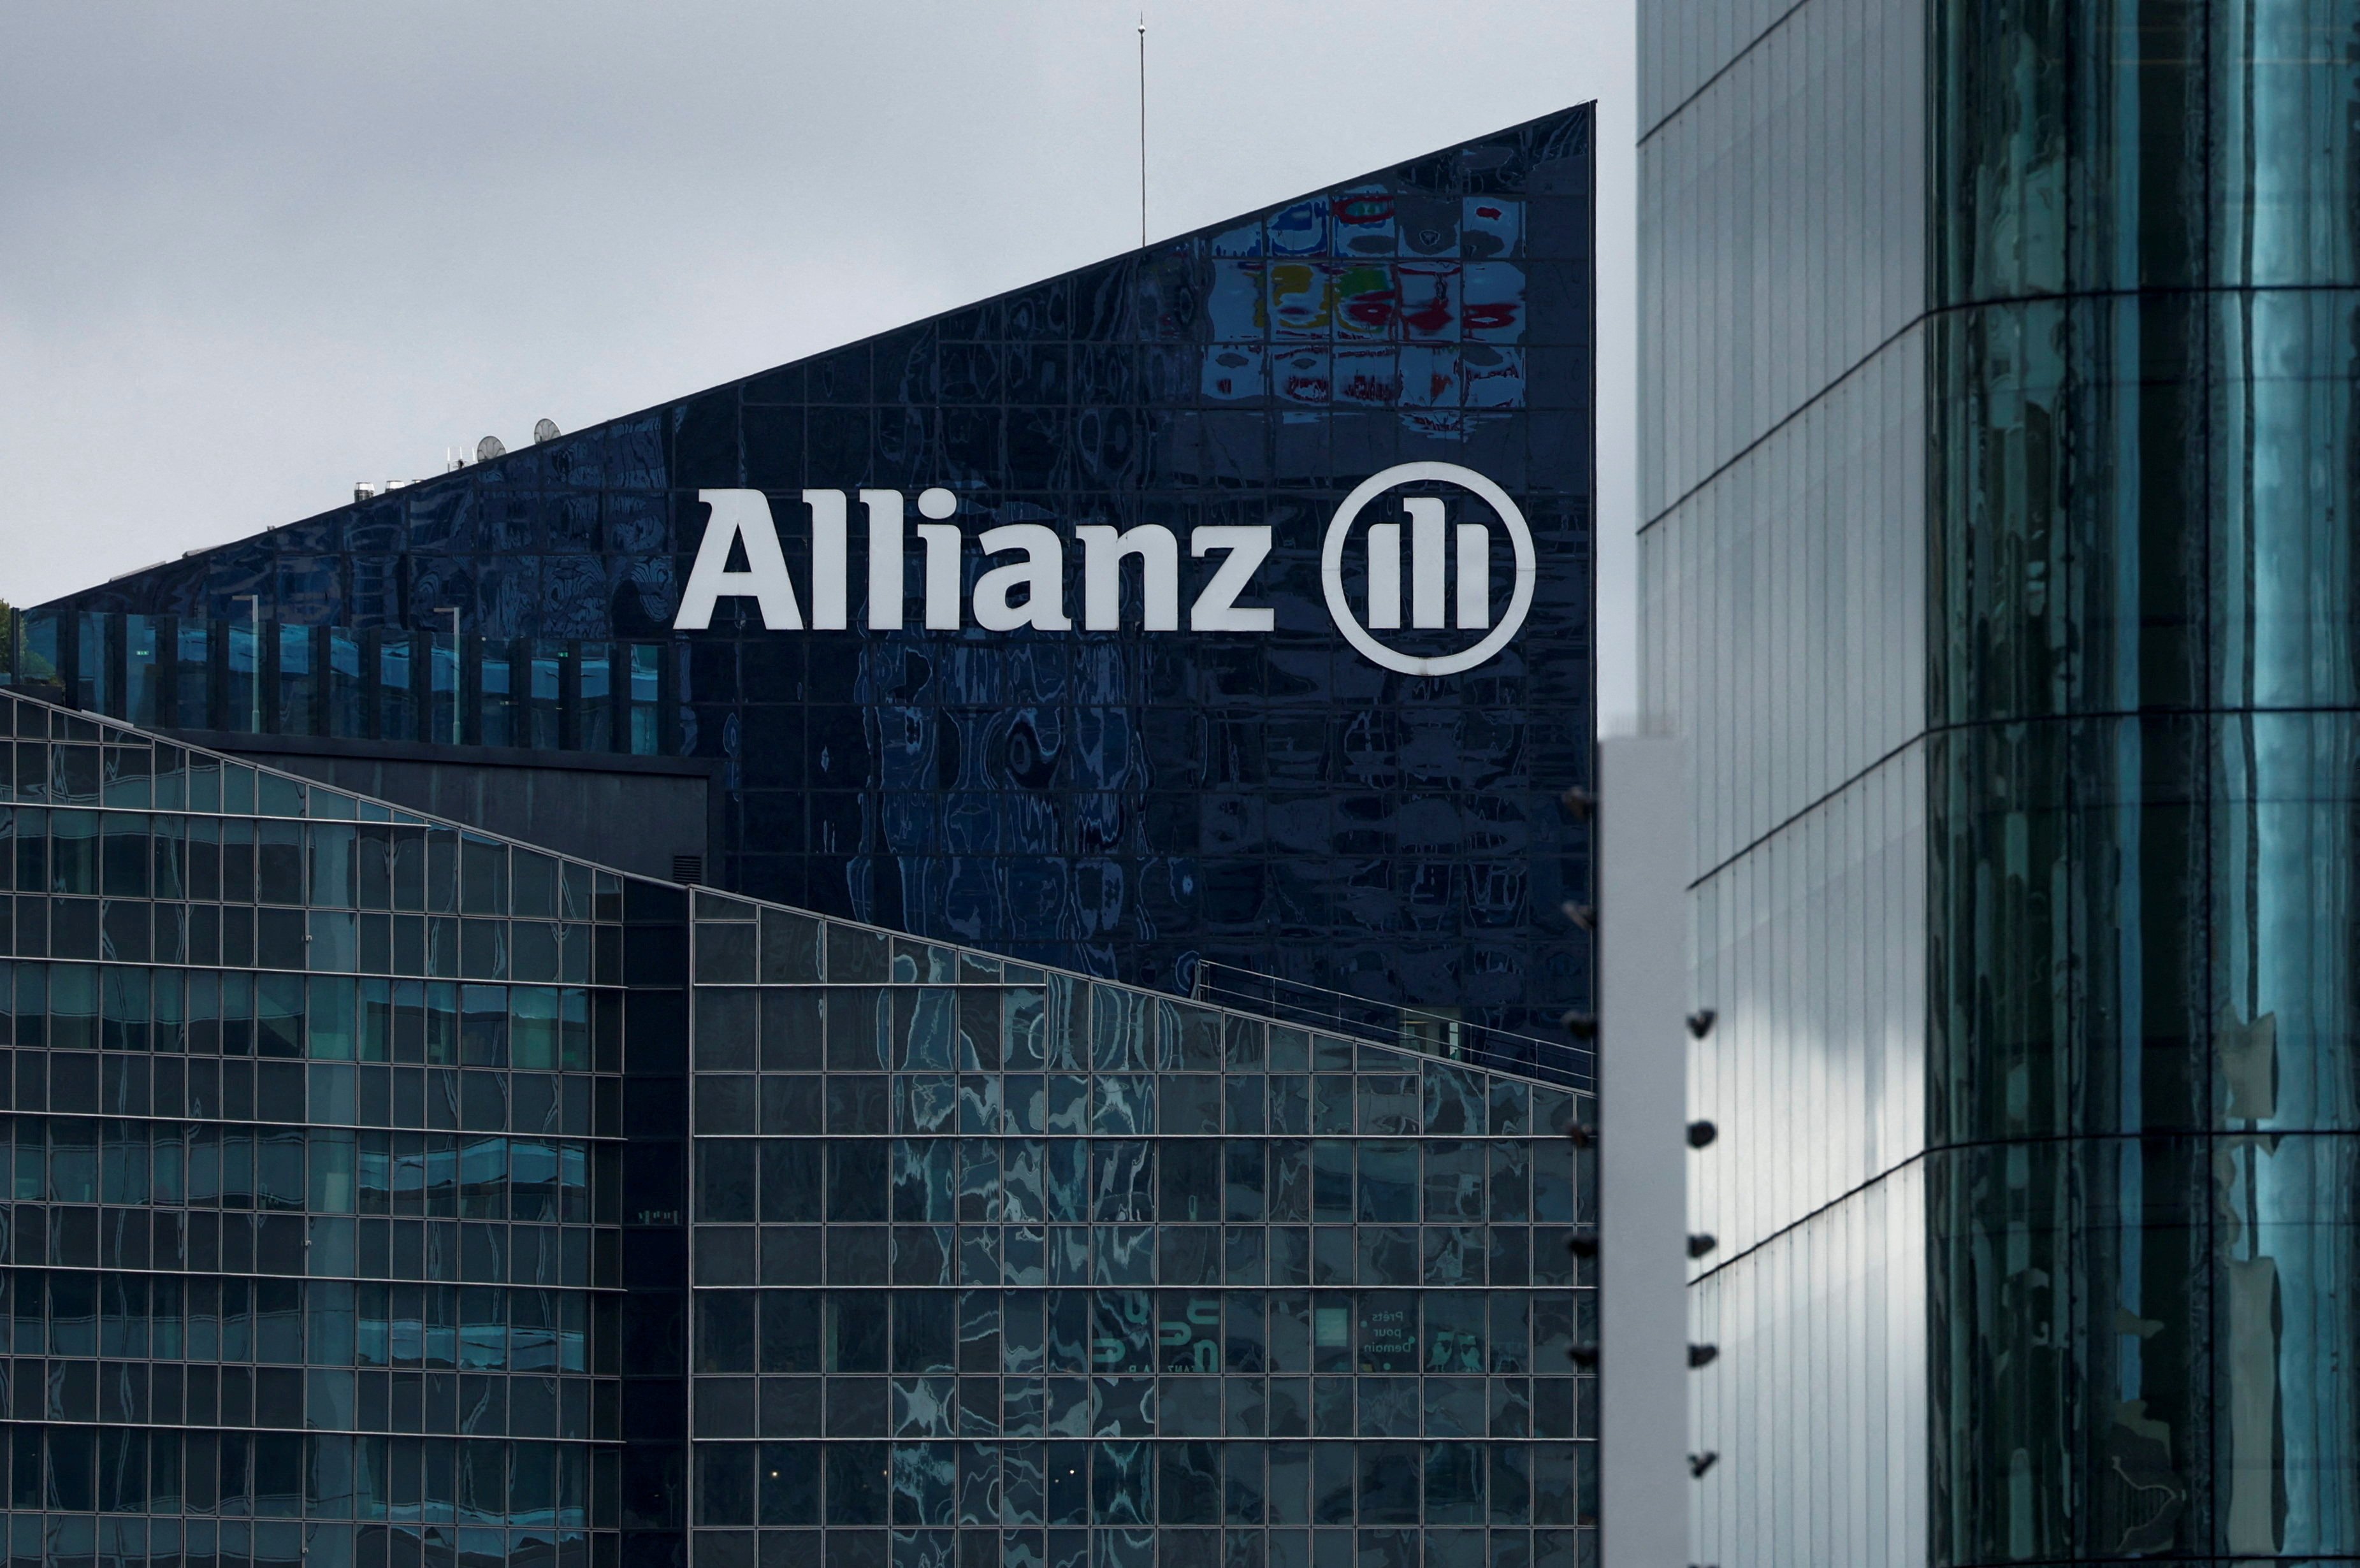 Setting up its local public fund management business will allow AllianzGI to serve the growing population of retail investors in mainland China, according to CEO Tobias Pross. Photo: Reuters